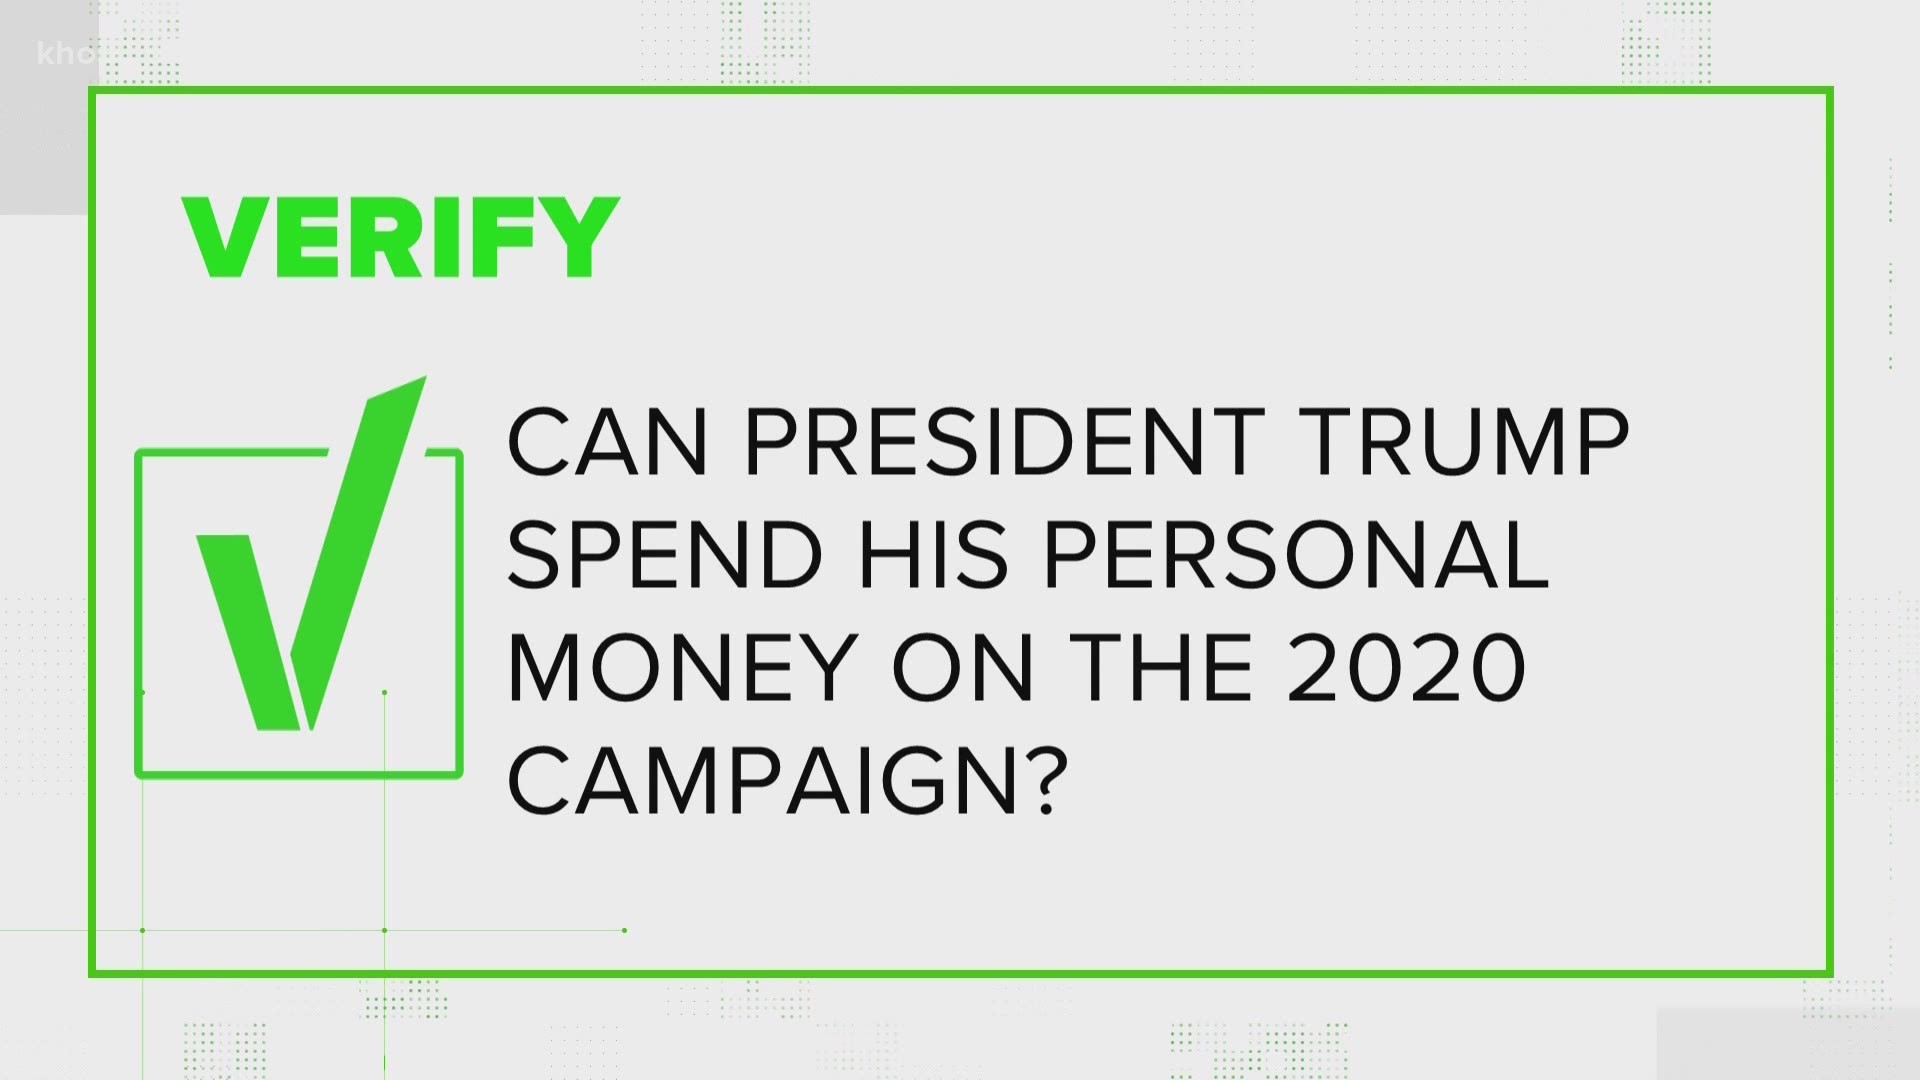 Any candidate can use their personal money to fund their campaigns.